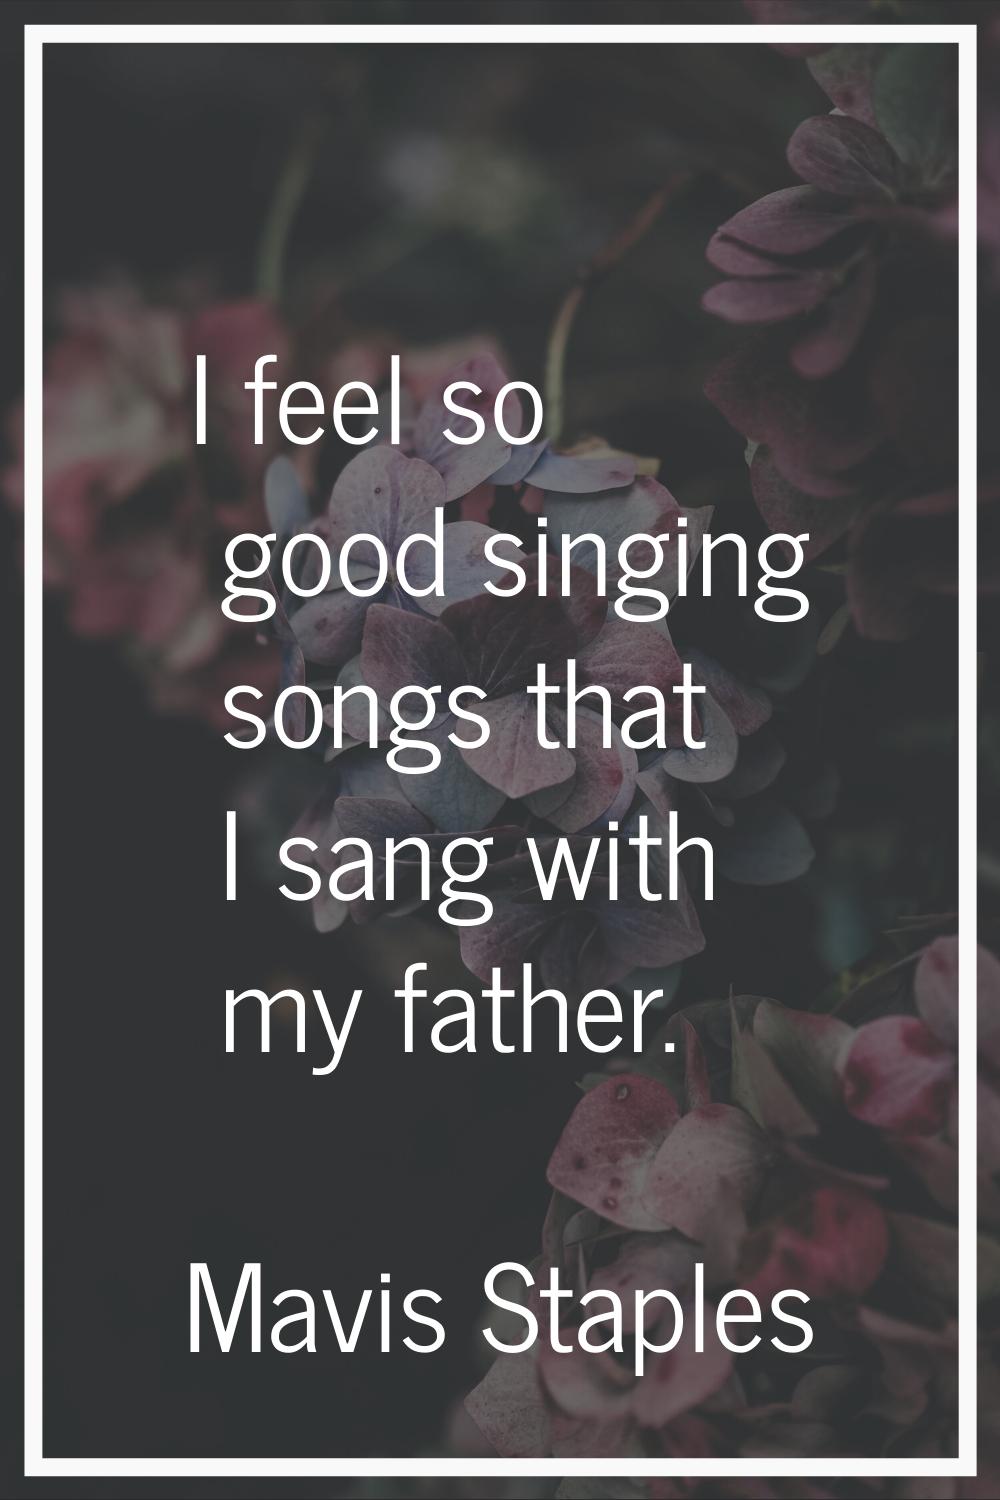 I feel so good singing songs that I sang with my father.